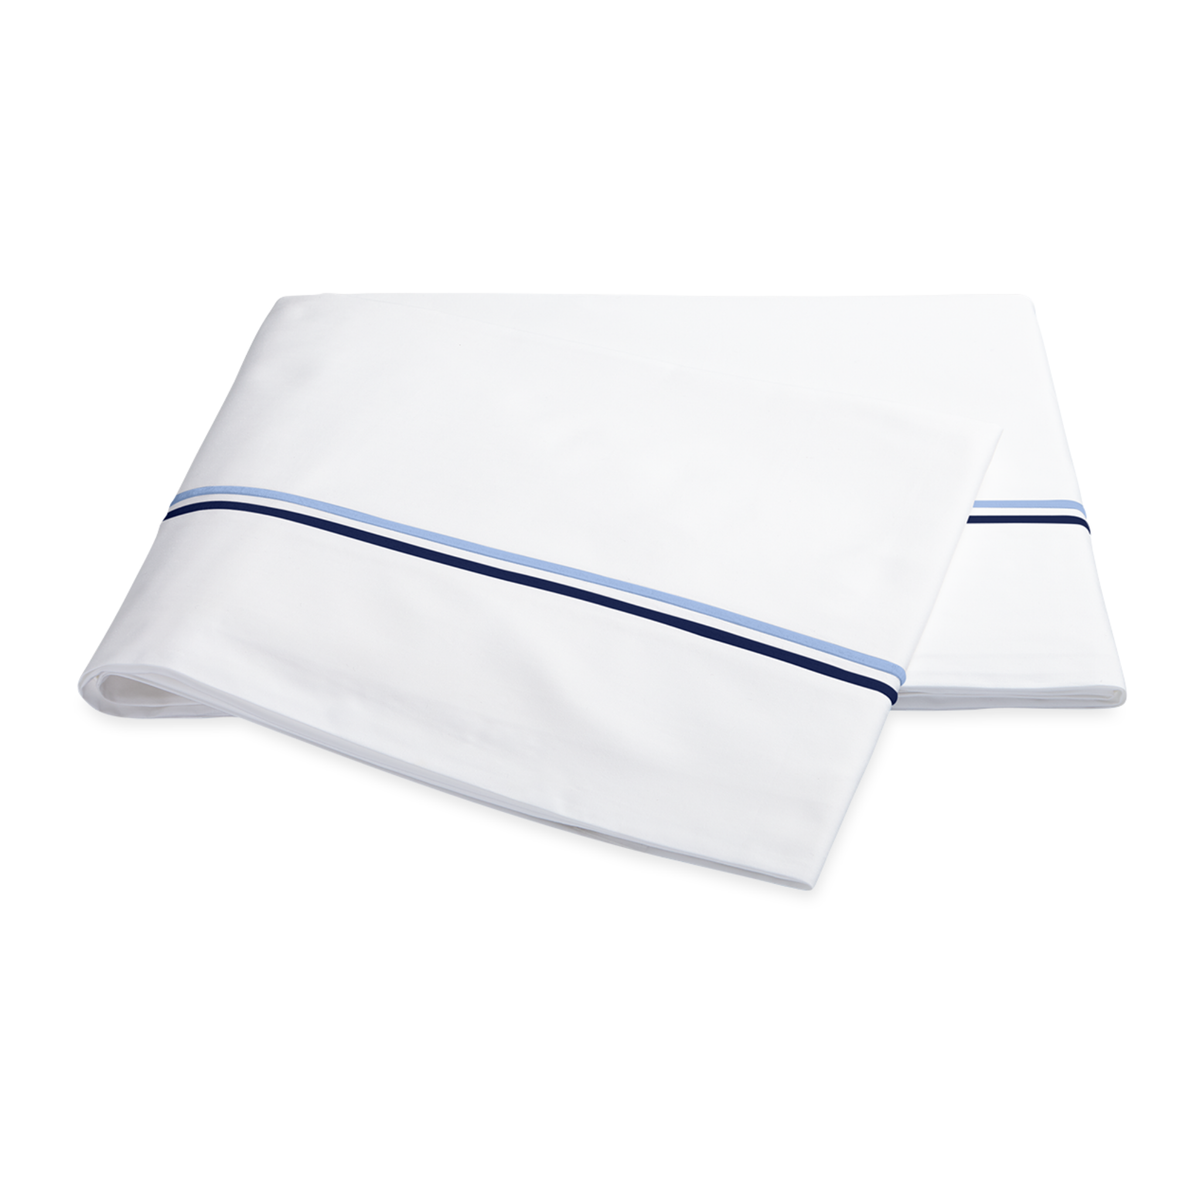  Flat Sheet of Matouk Essex Bedding Collection in Navy Color